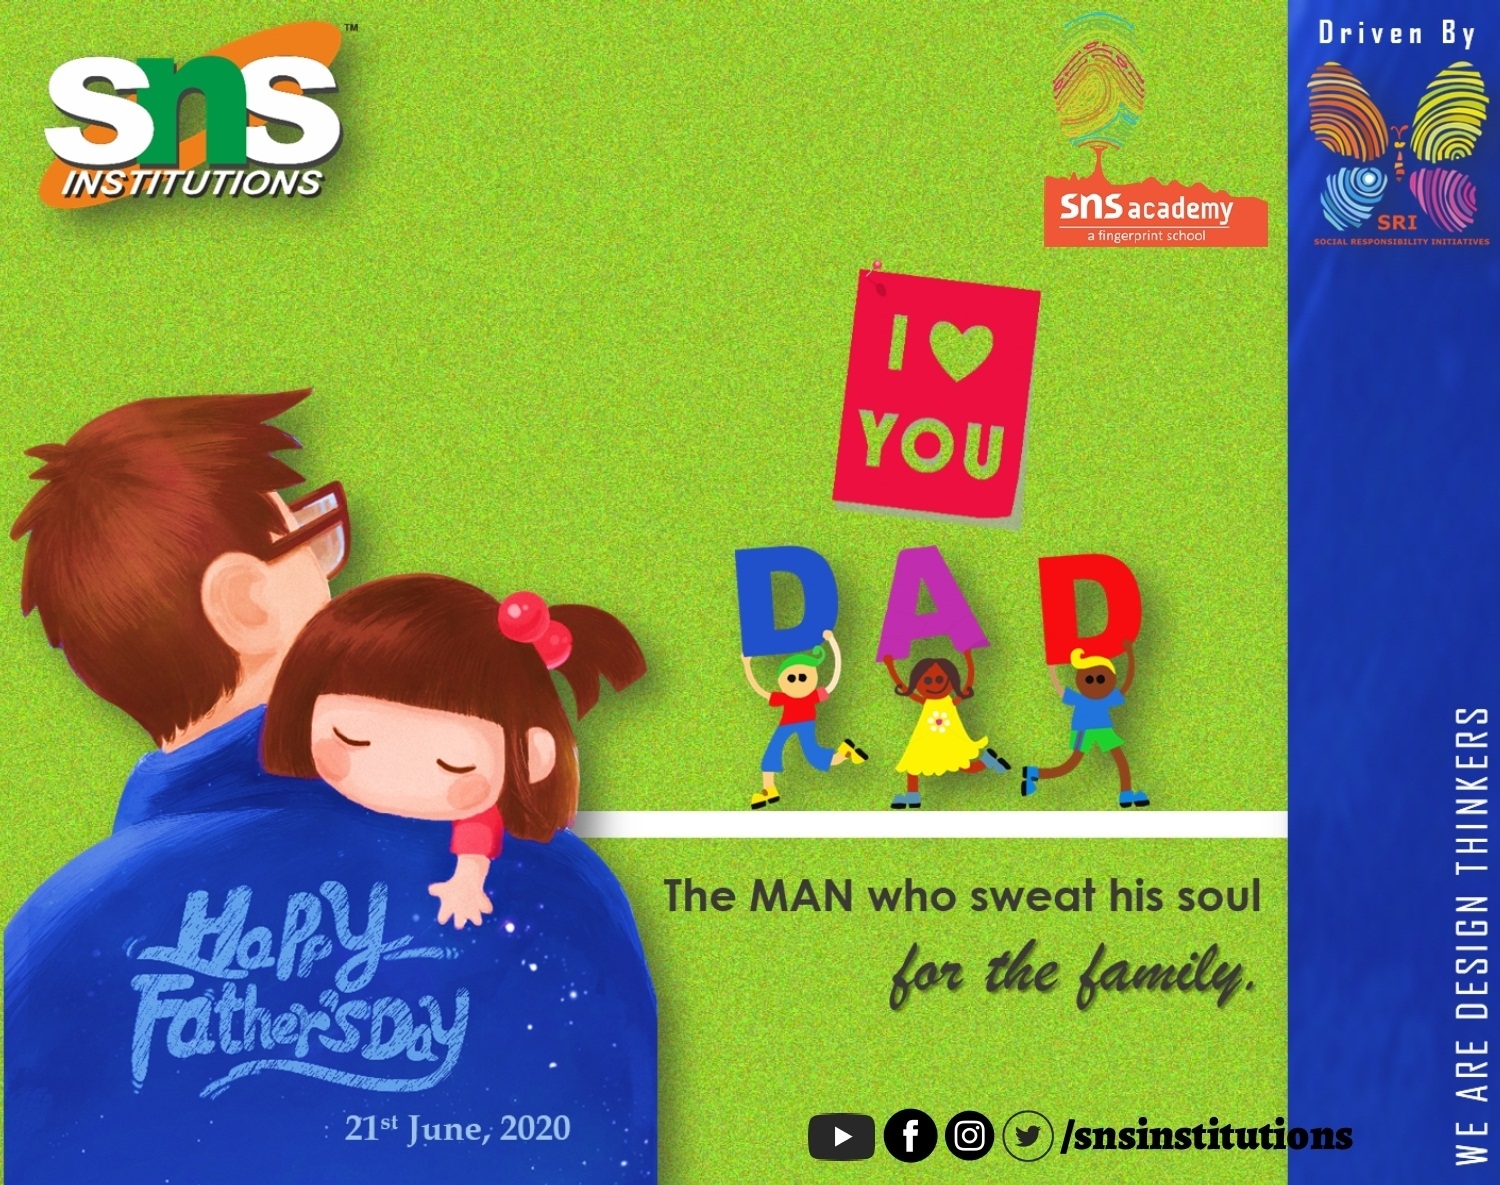 College News | SNS Academy - Fathers Day Wishes